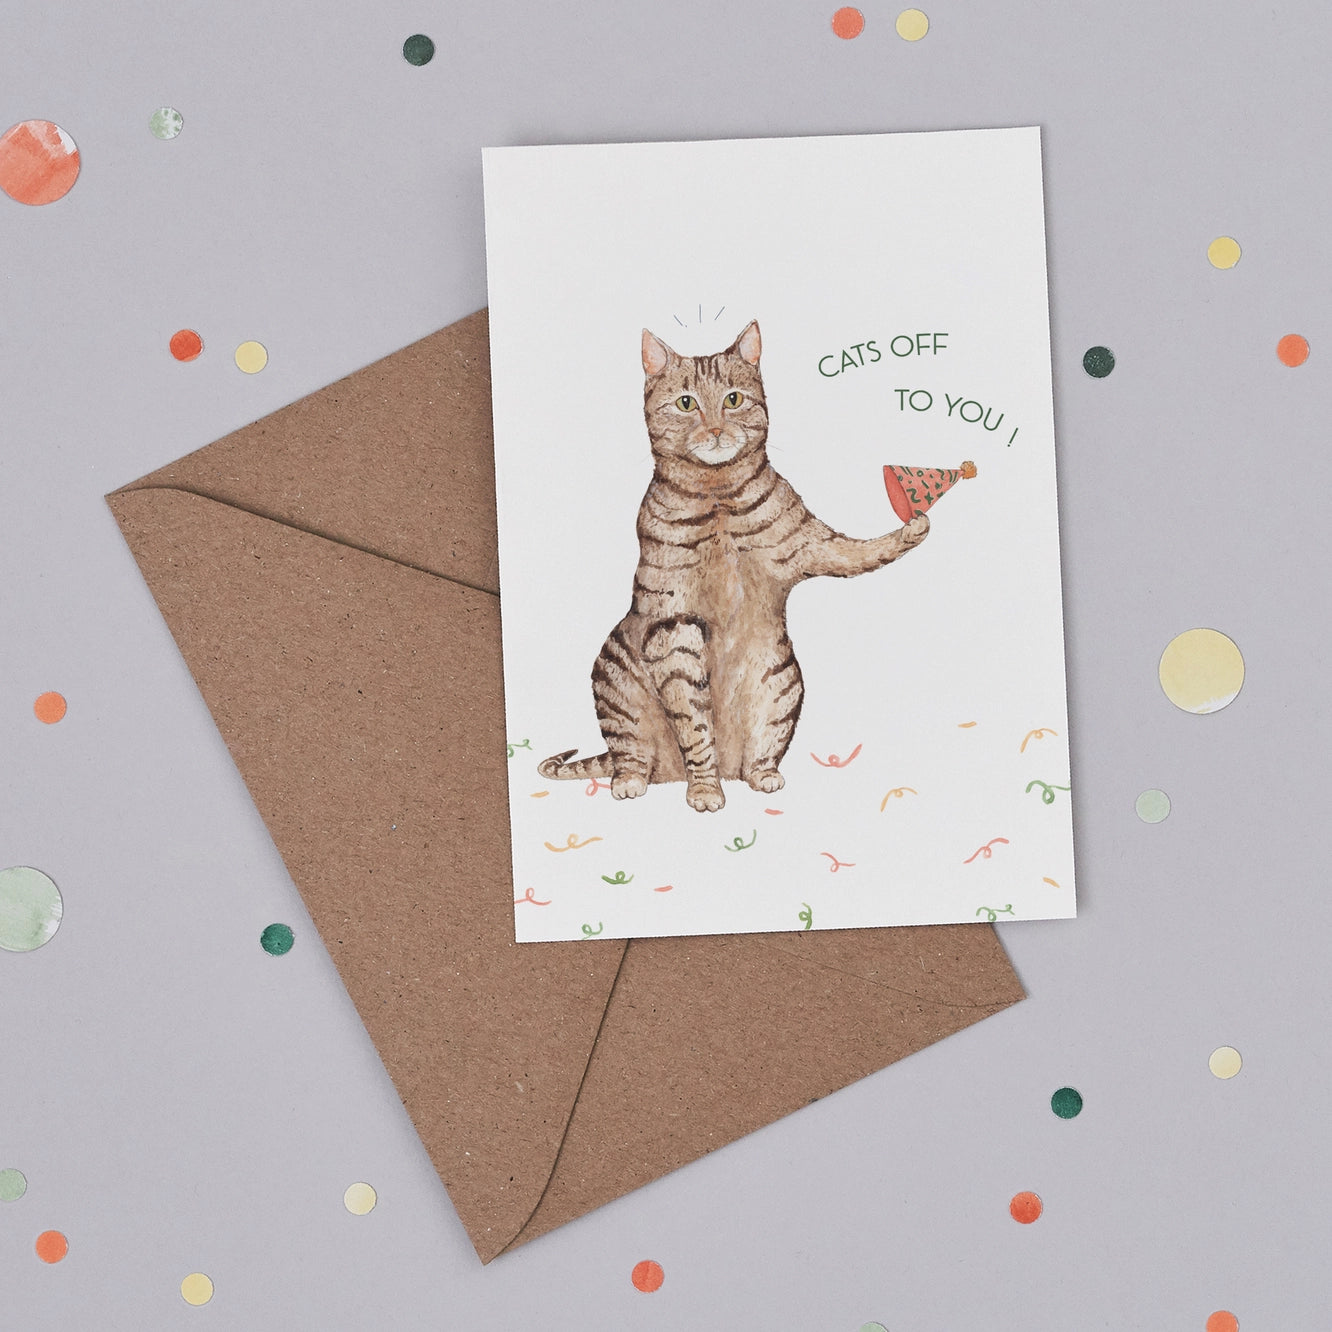 'Cats Off To You' Greetings Card